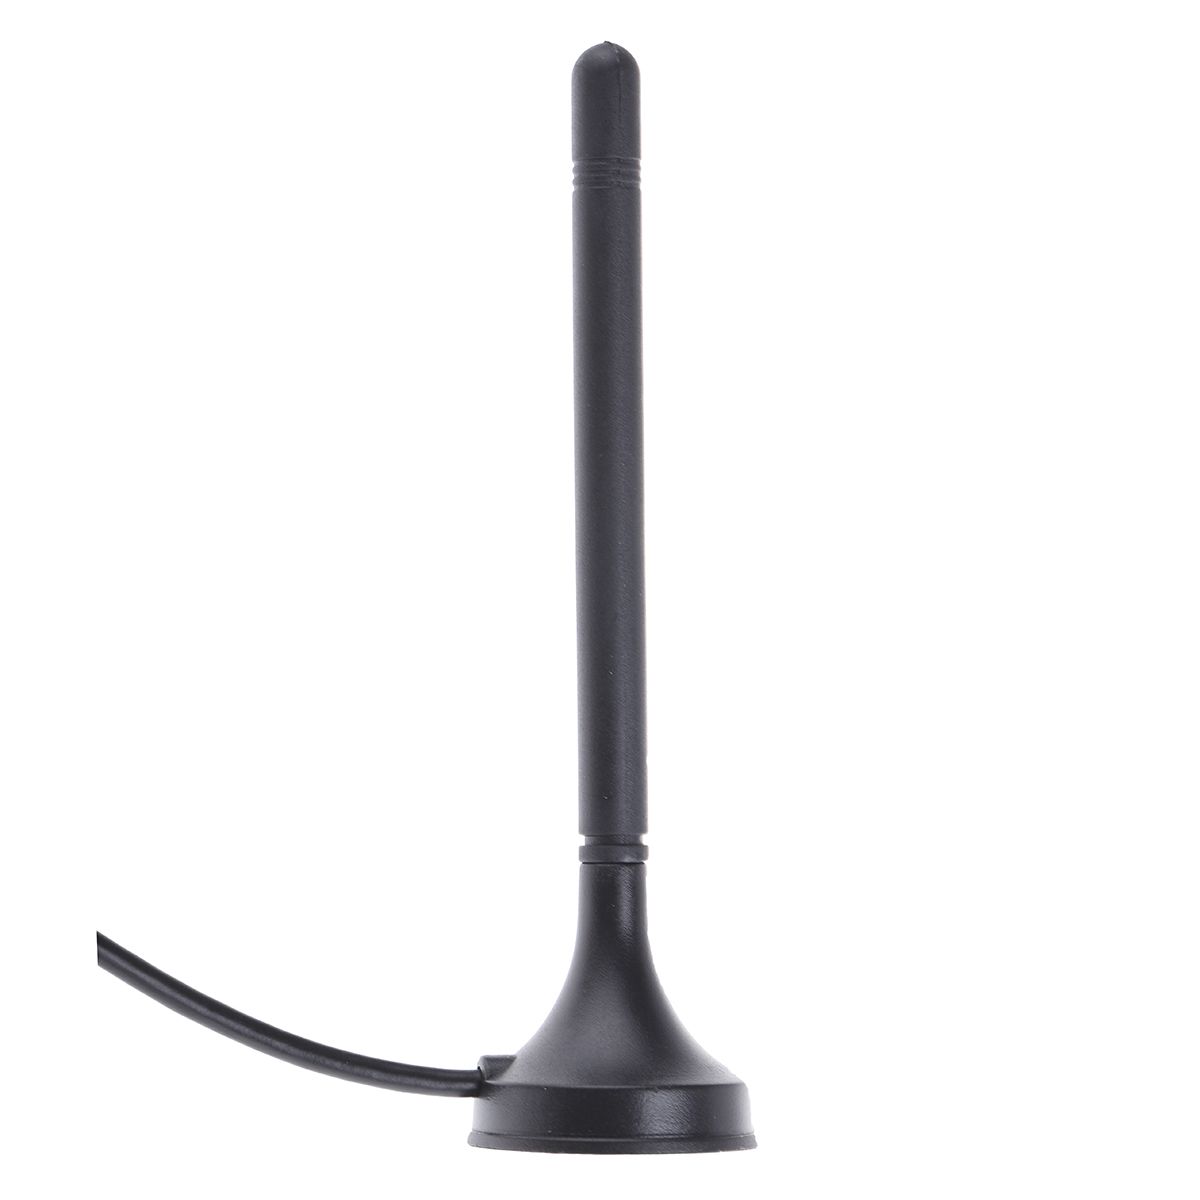 RF Solutions ANT-GSMSTUB4 Stubby Antenna with SMA Connector, 2G (GSM/GPRS), 3G (UTMS)